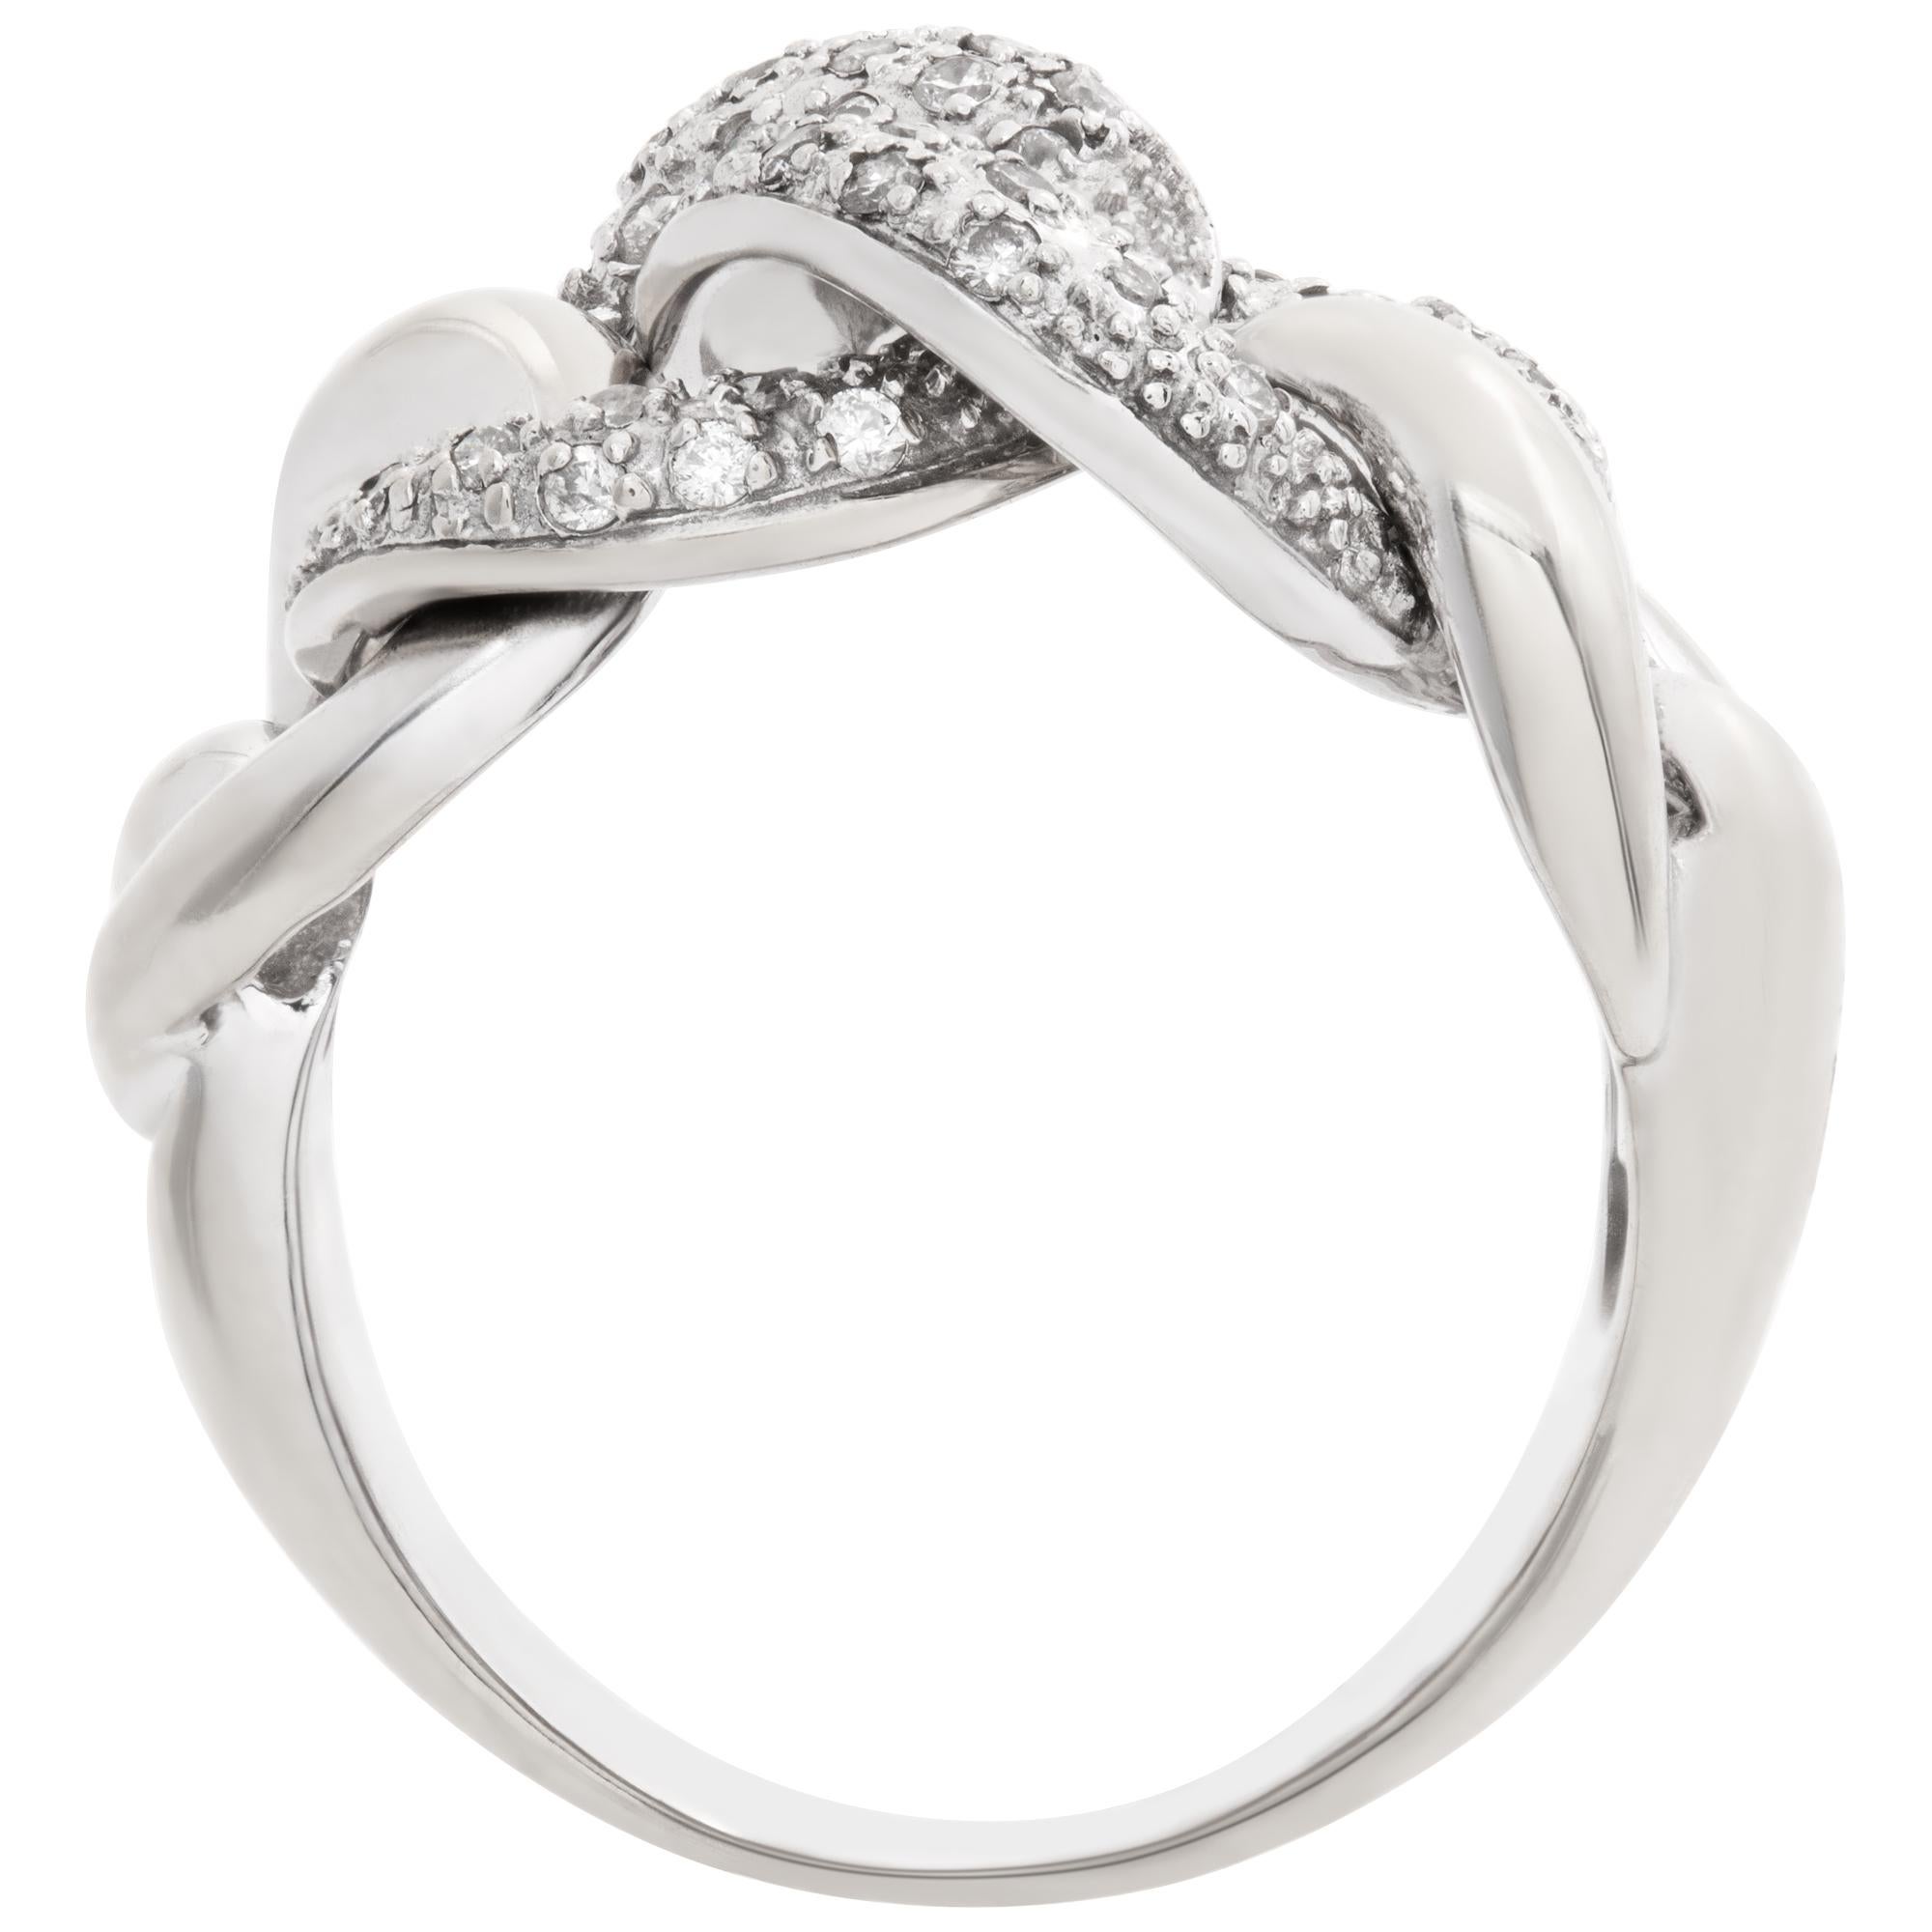 Women's Pave Diamond link ring in 14k white gold. 0.50 carats in diamonds.  For Sale